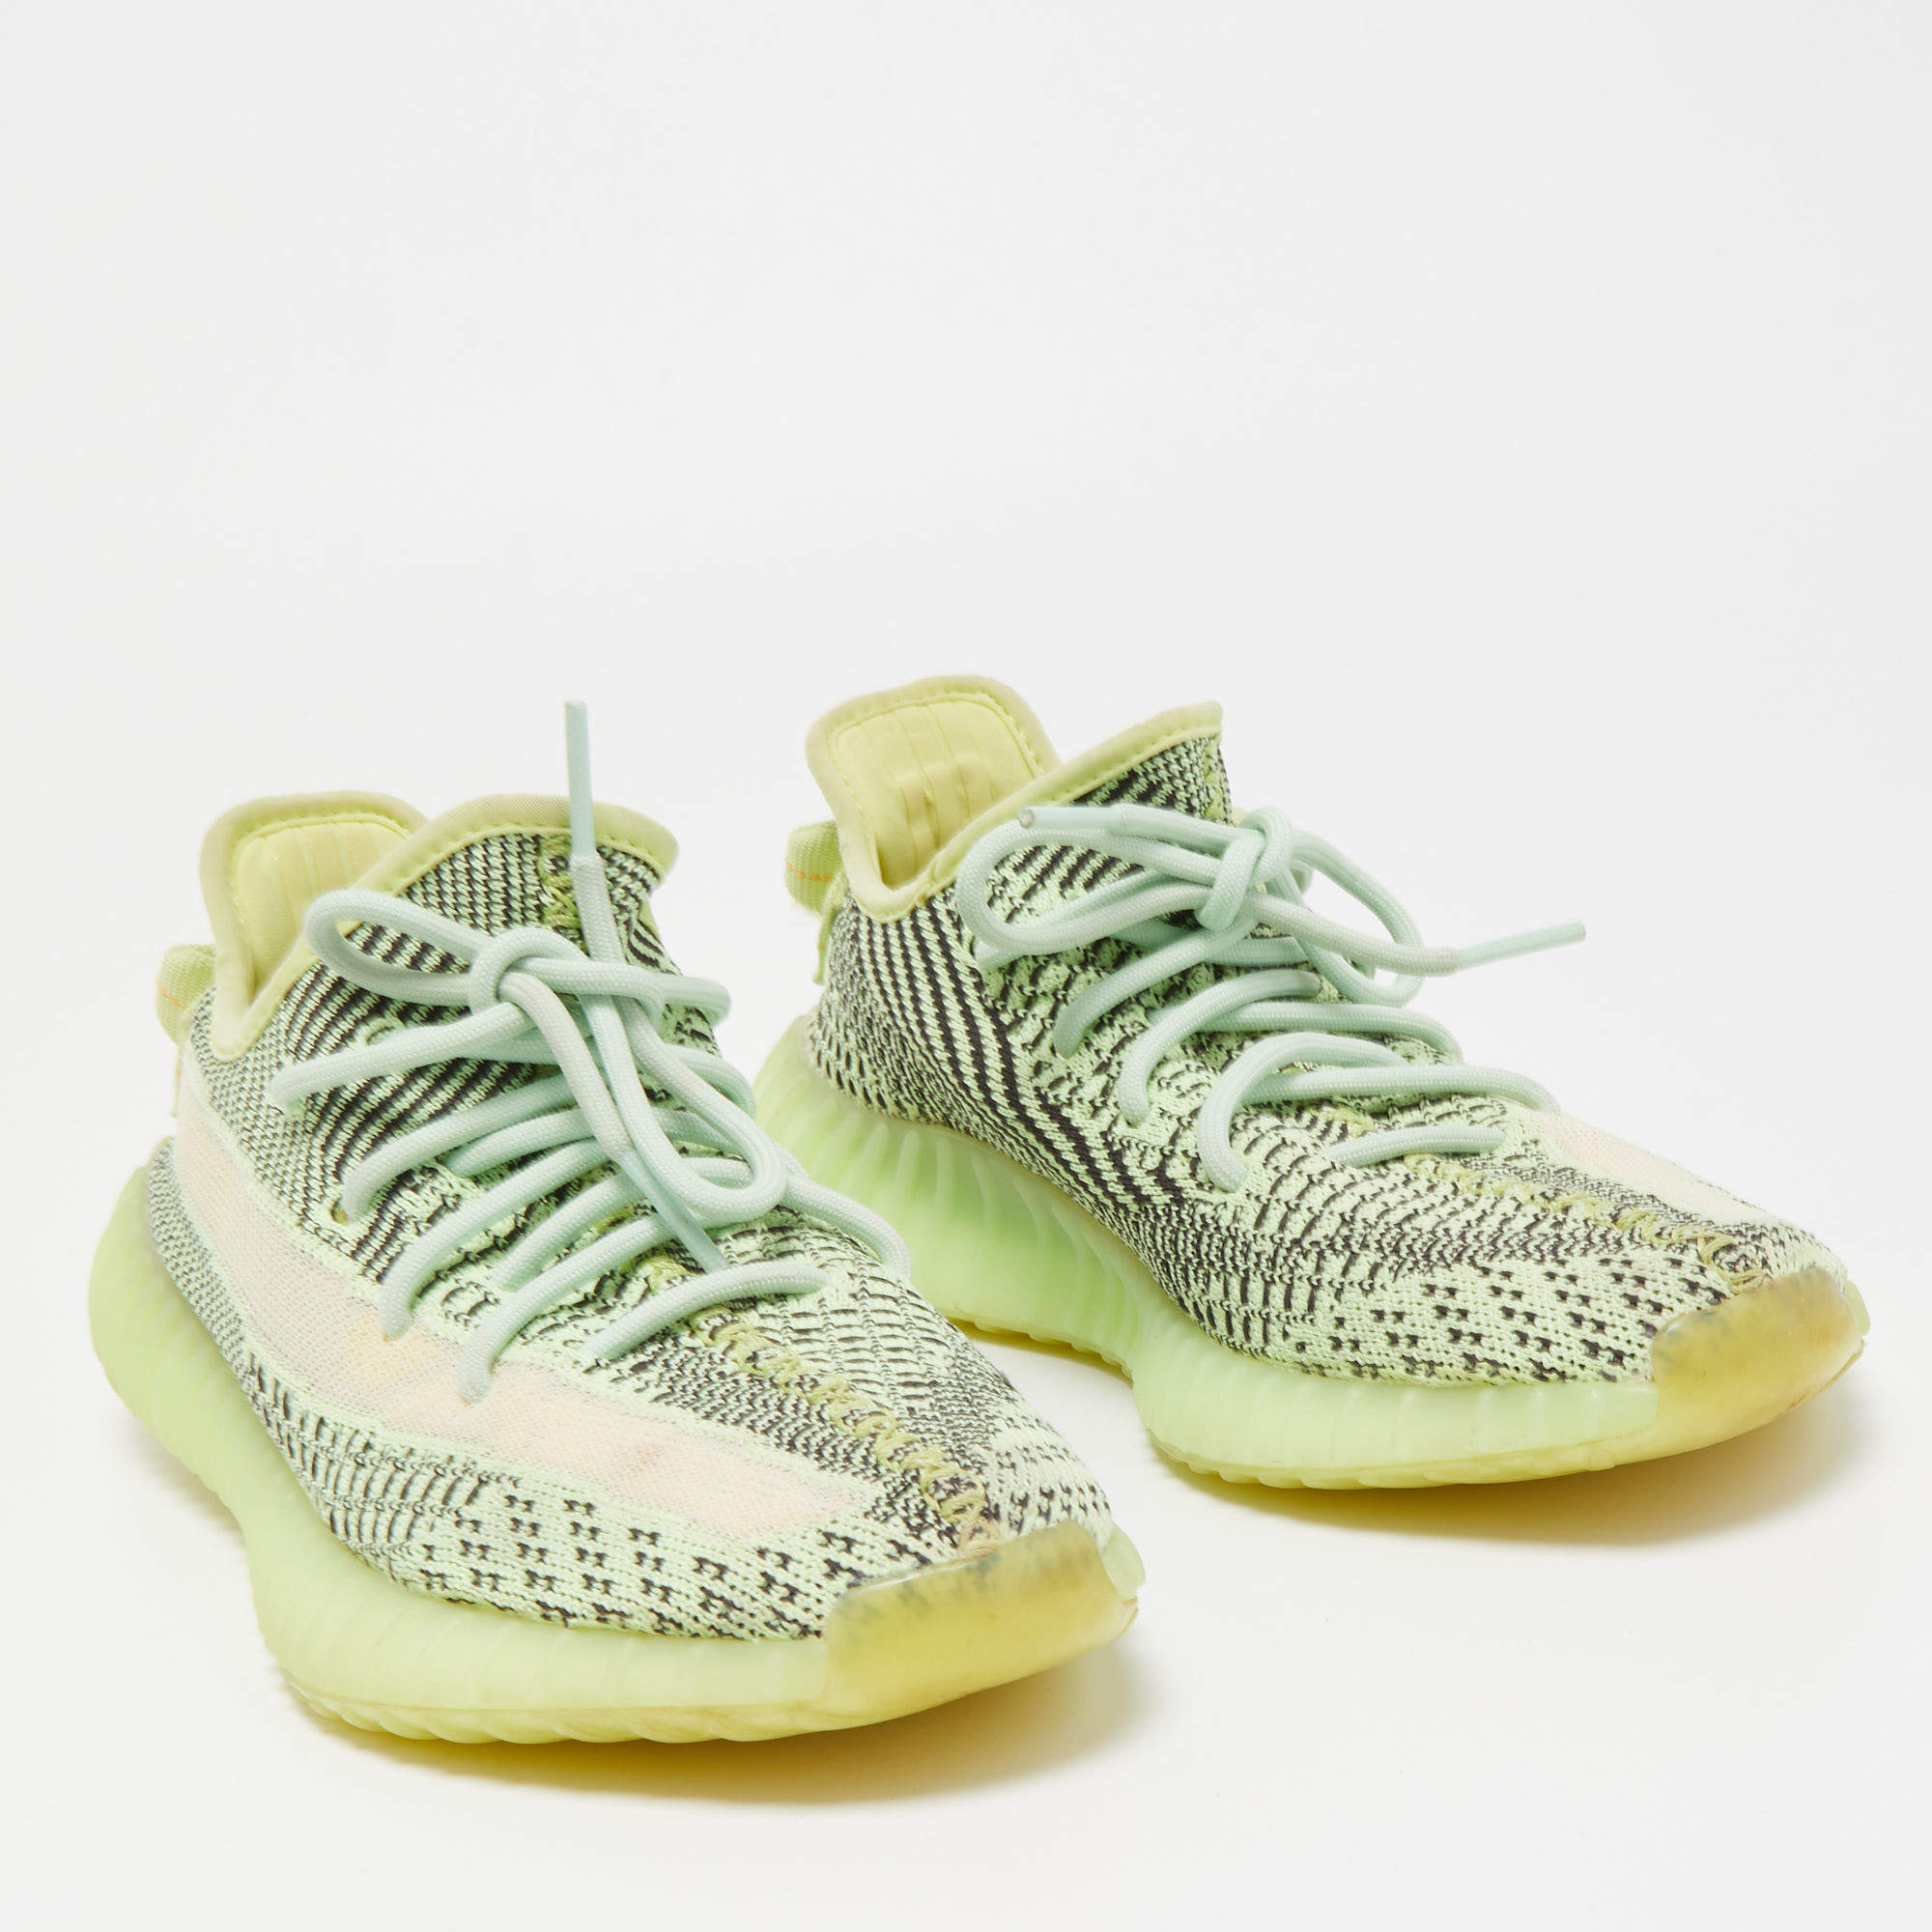 Yeezy x Adidas Neon Green Knit Fabric Boost 350 V2 Glow Sneakers